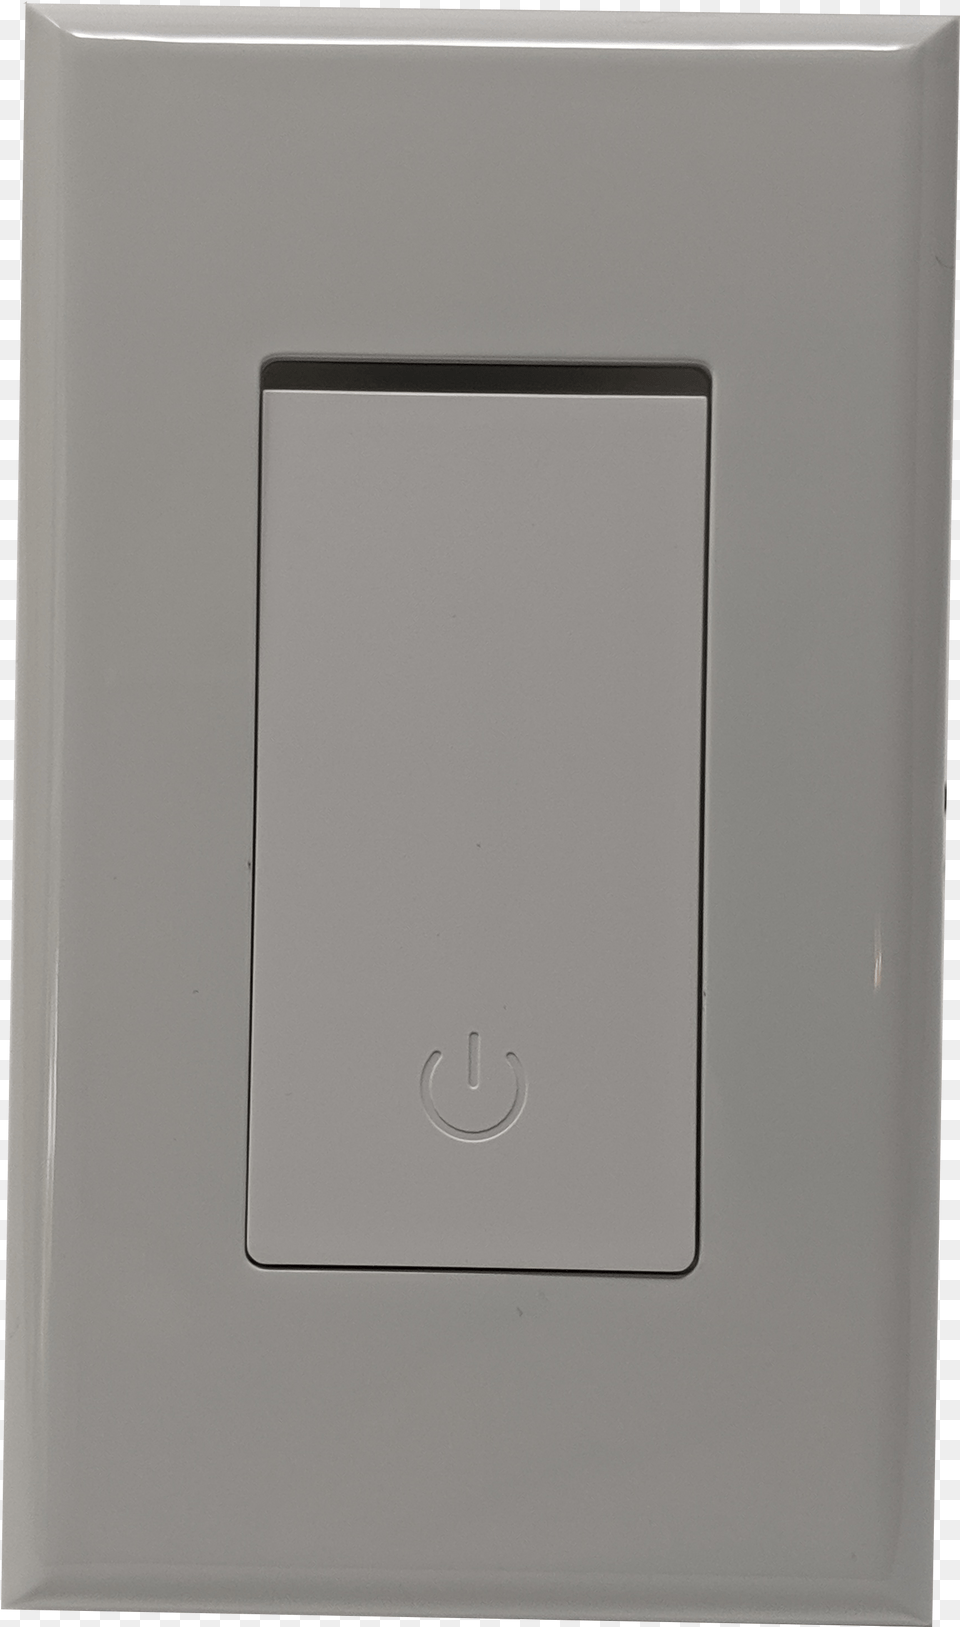 Megapixall Smart Home Light Switch Door, Electrical Device, White Board Png Image